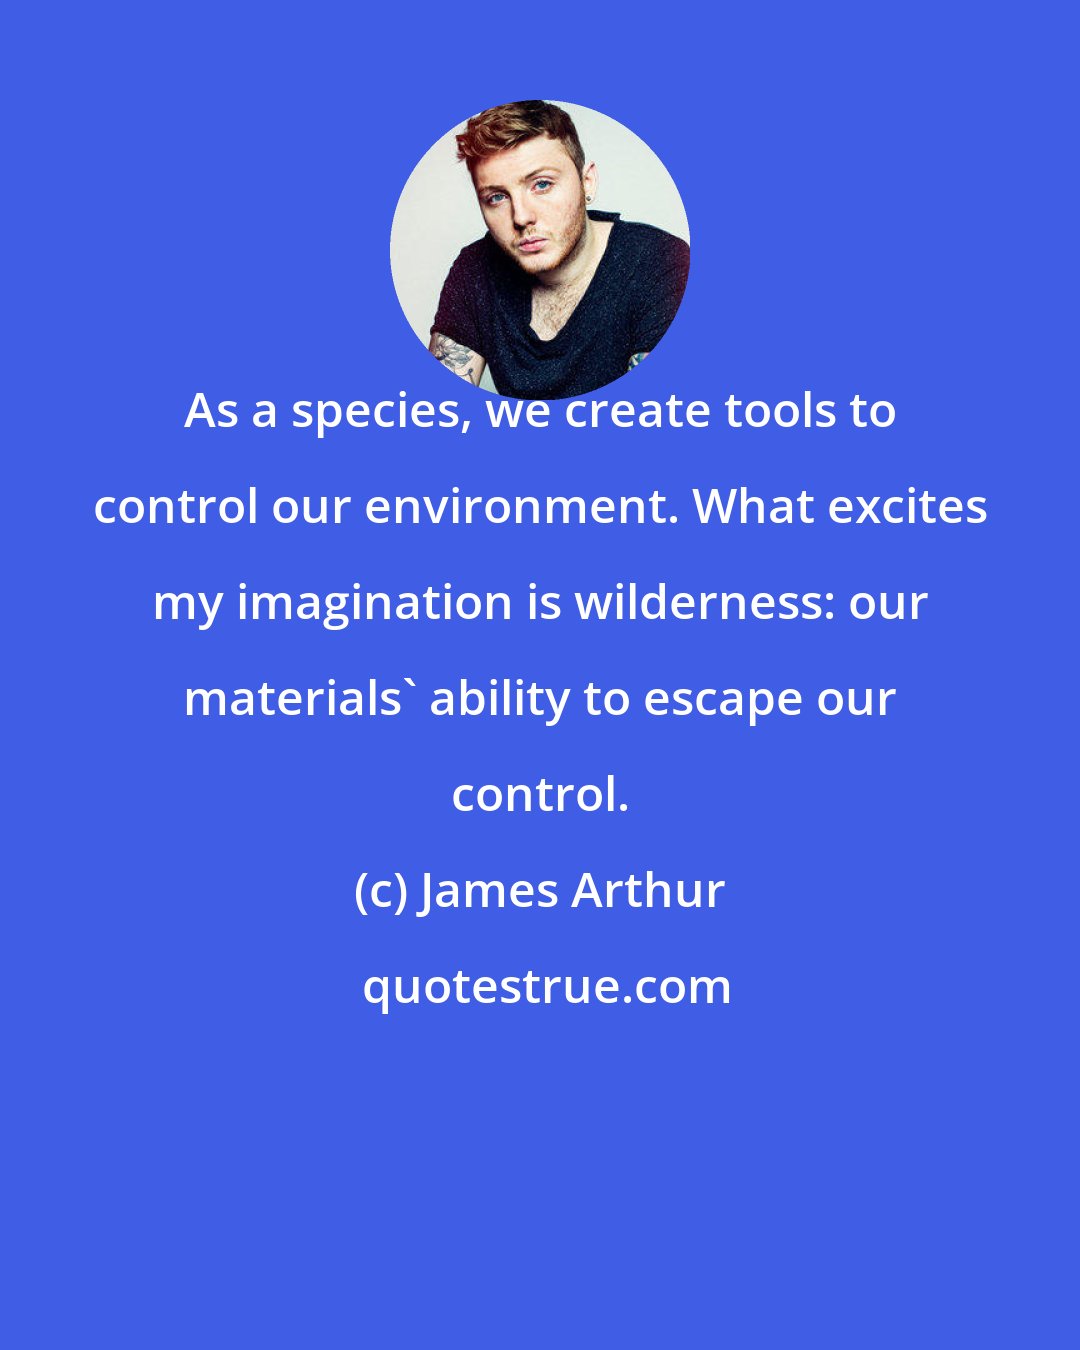 James Arthur: As a species, we create tools to control our environment. What excites my imagination is wilderness: our materials' ability to escape our control.